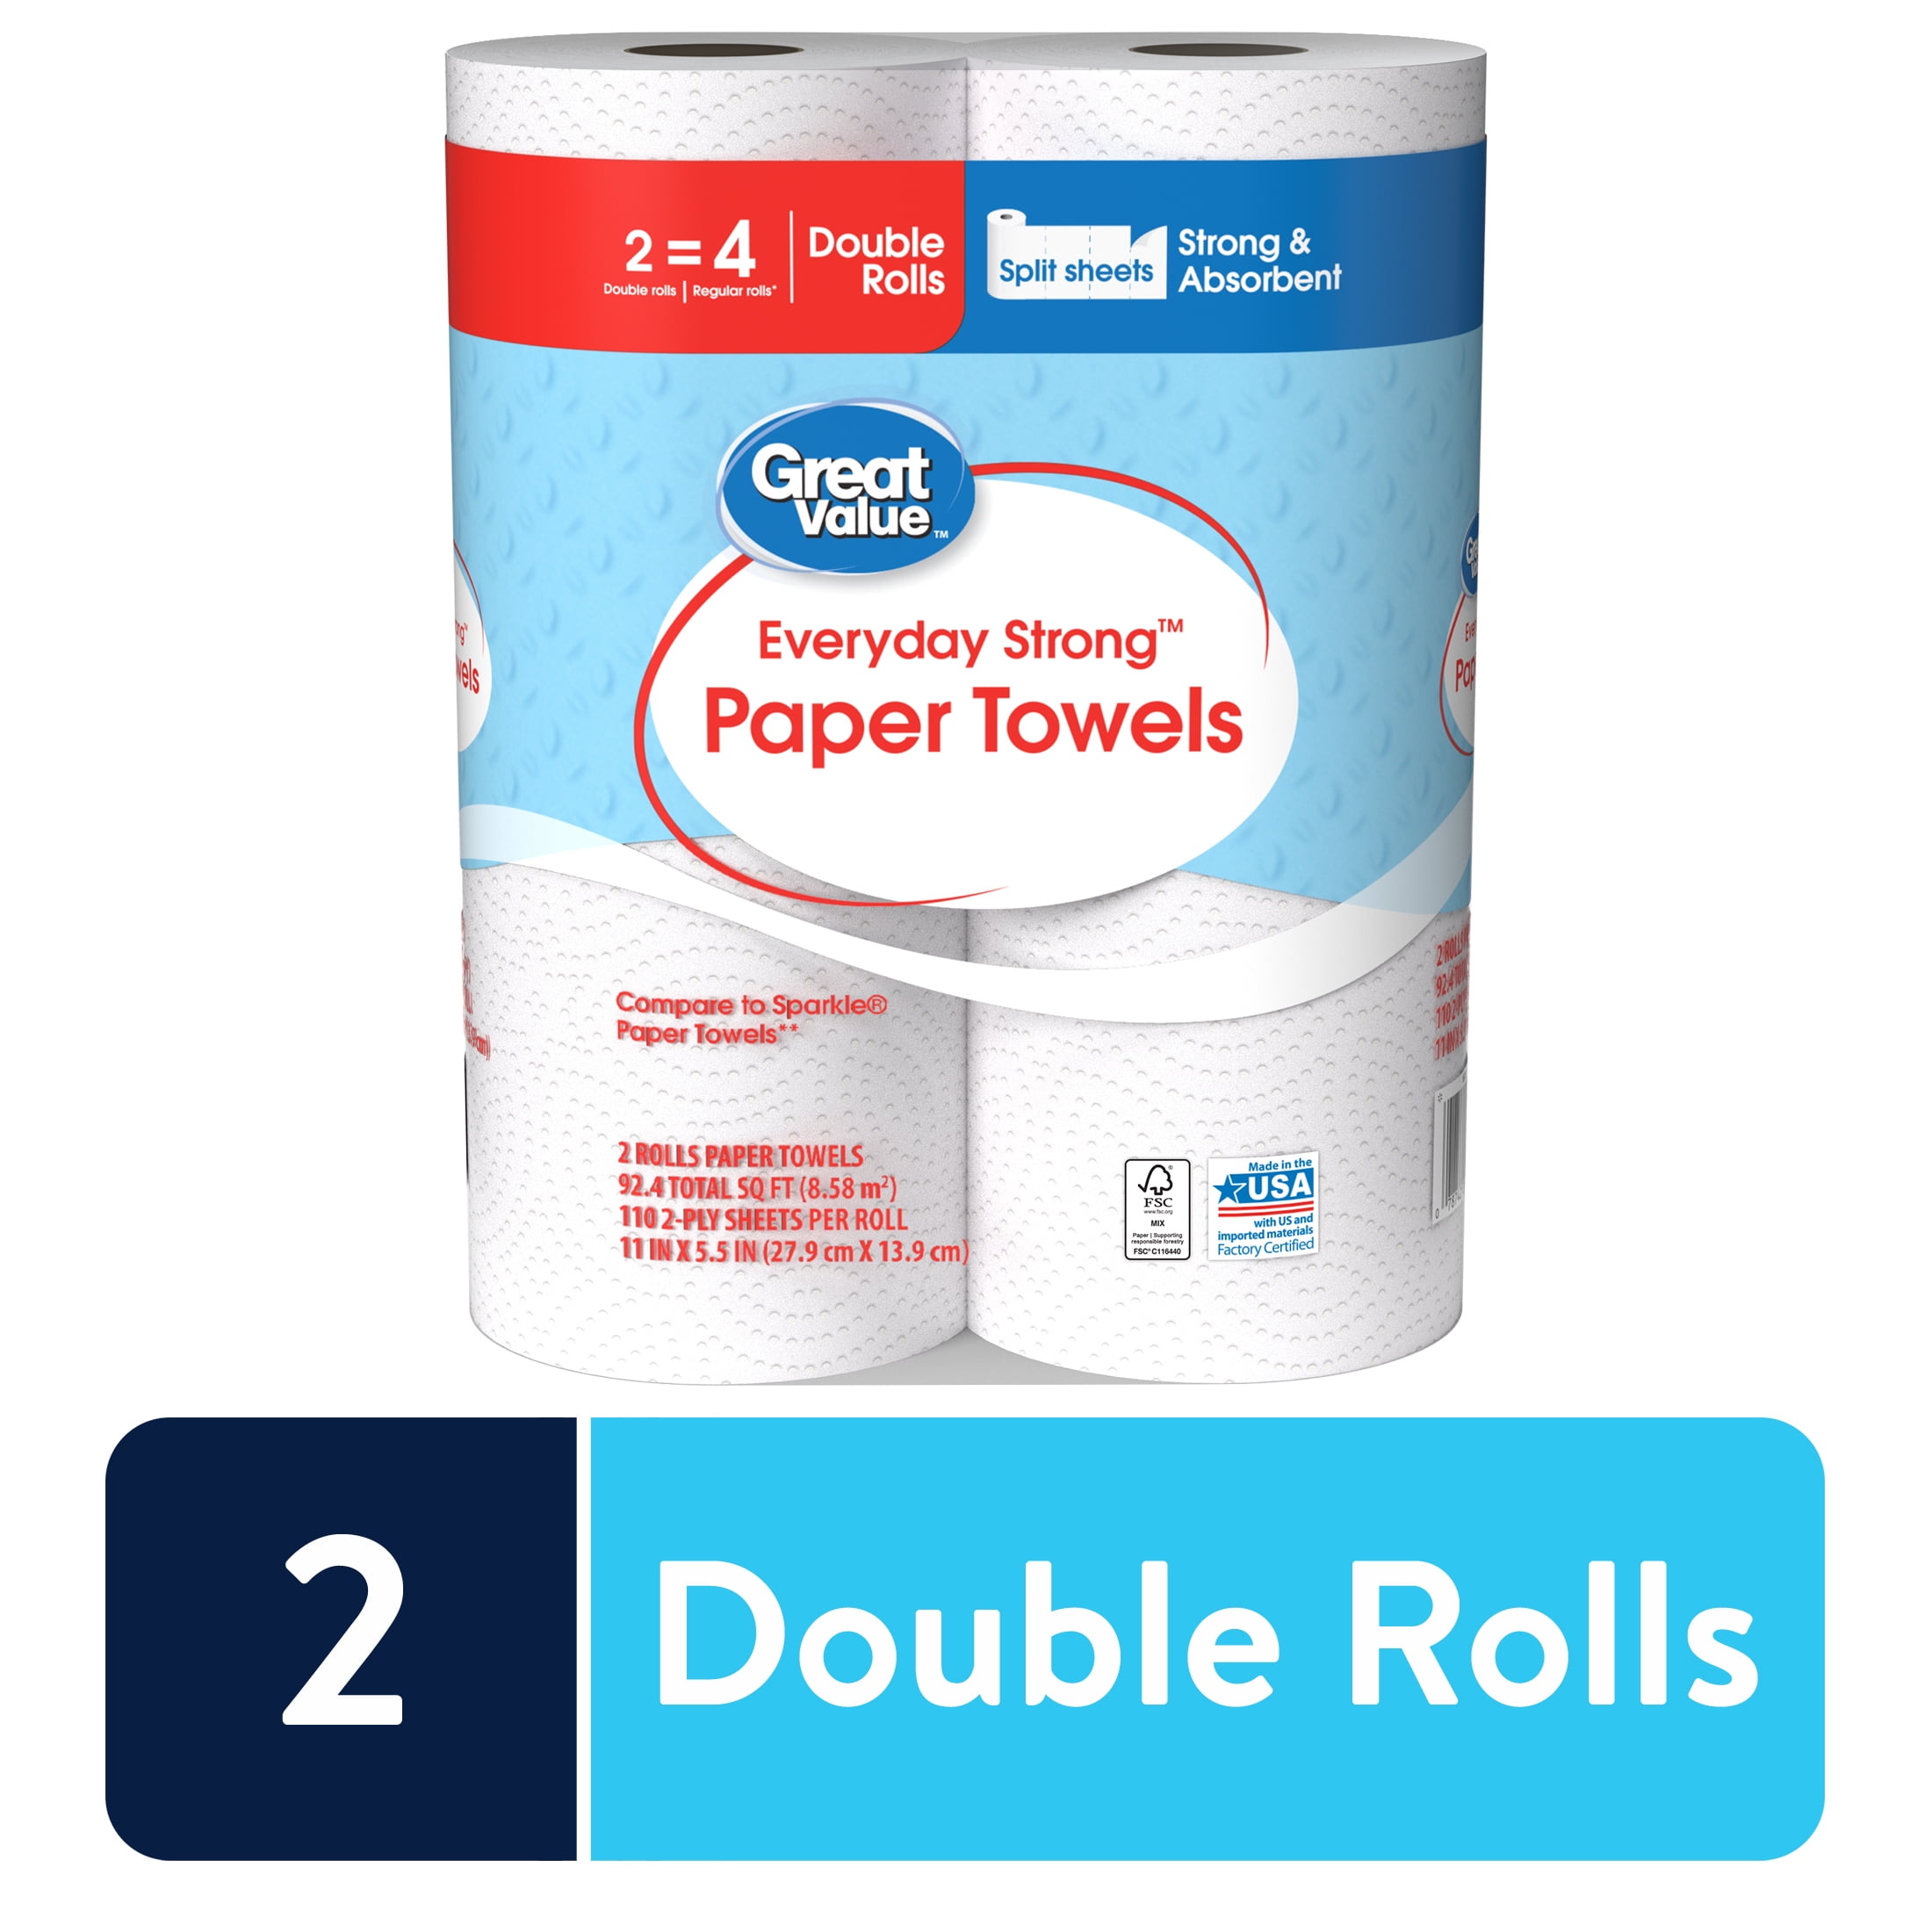 Walmart Supercenter Kissimmee - N Old Lake Wilson Road - Here at your  #WalmartSupercenter5214 we have a great item for you. Get your hands on  #GreatValue Ultra paper towels 🧻 for your